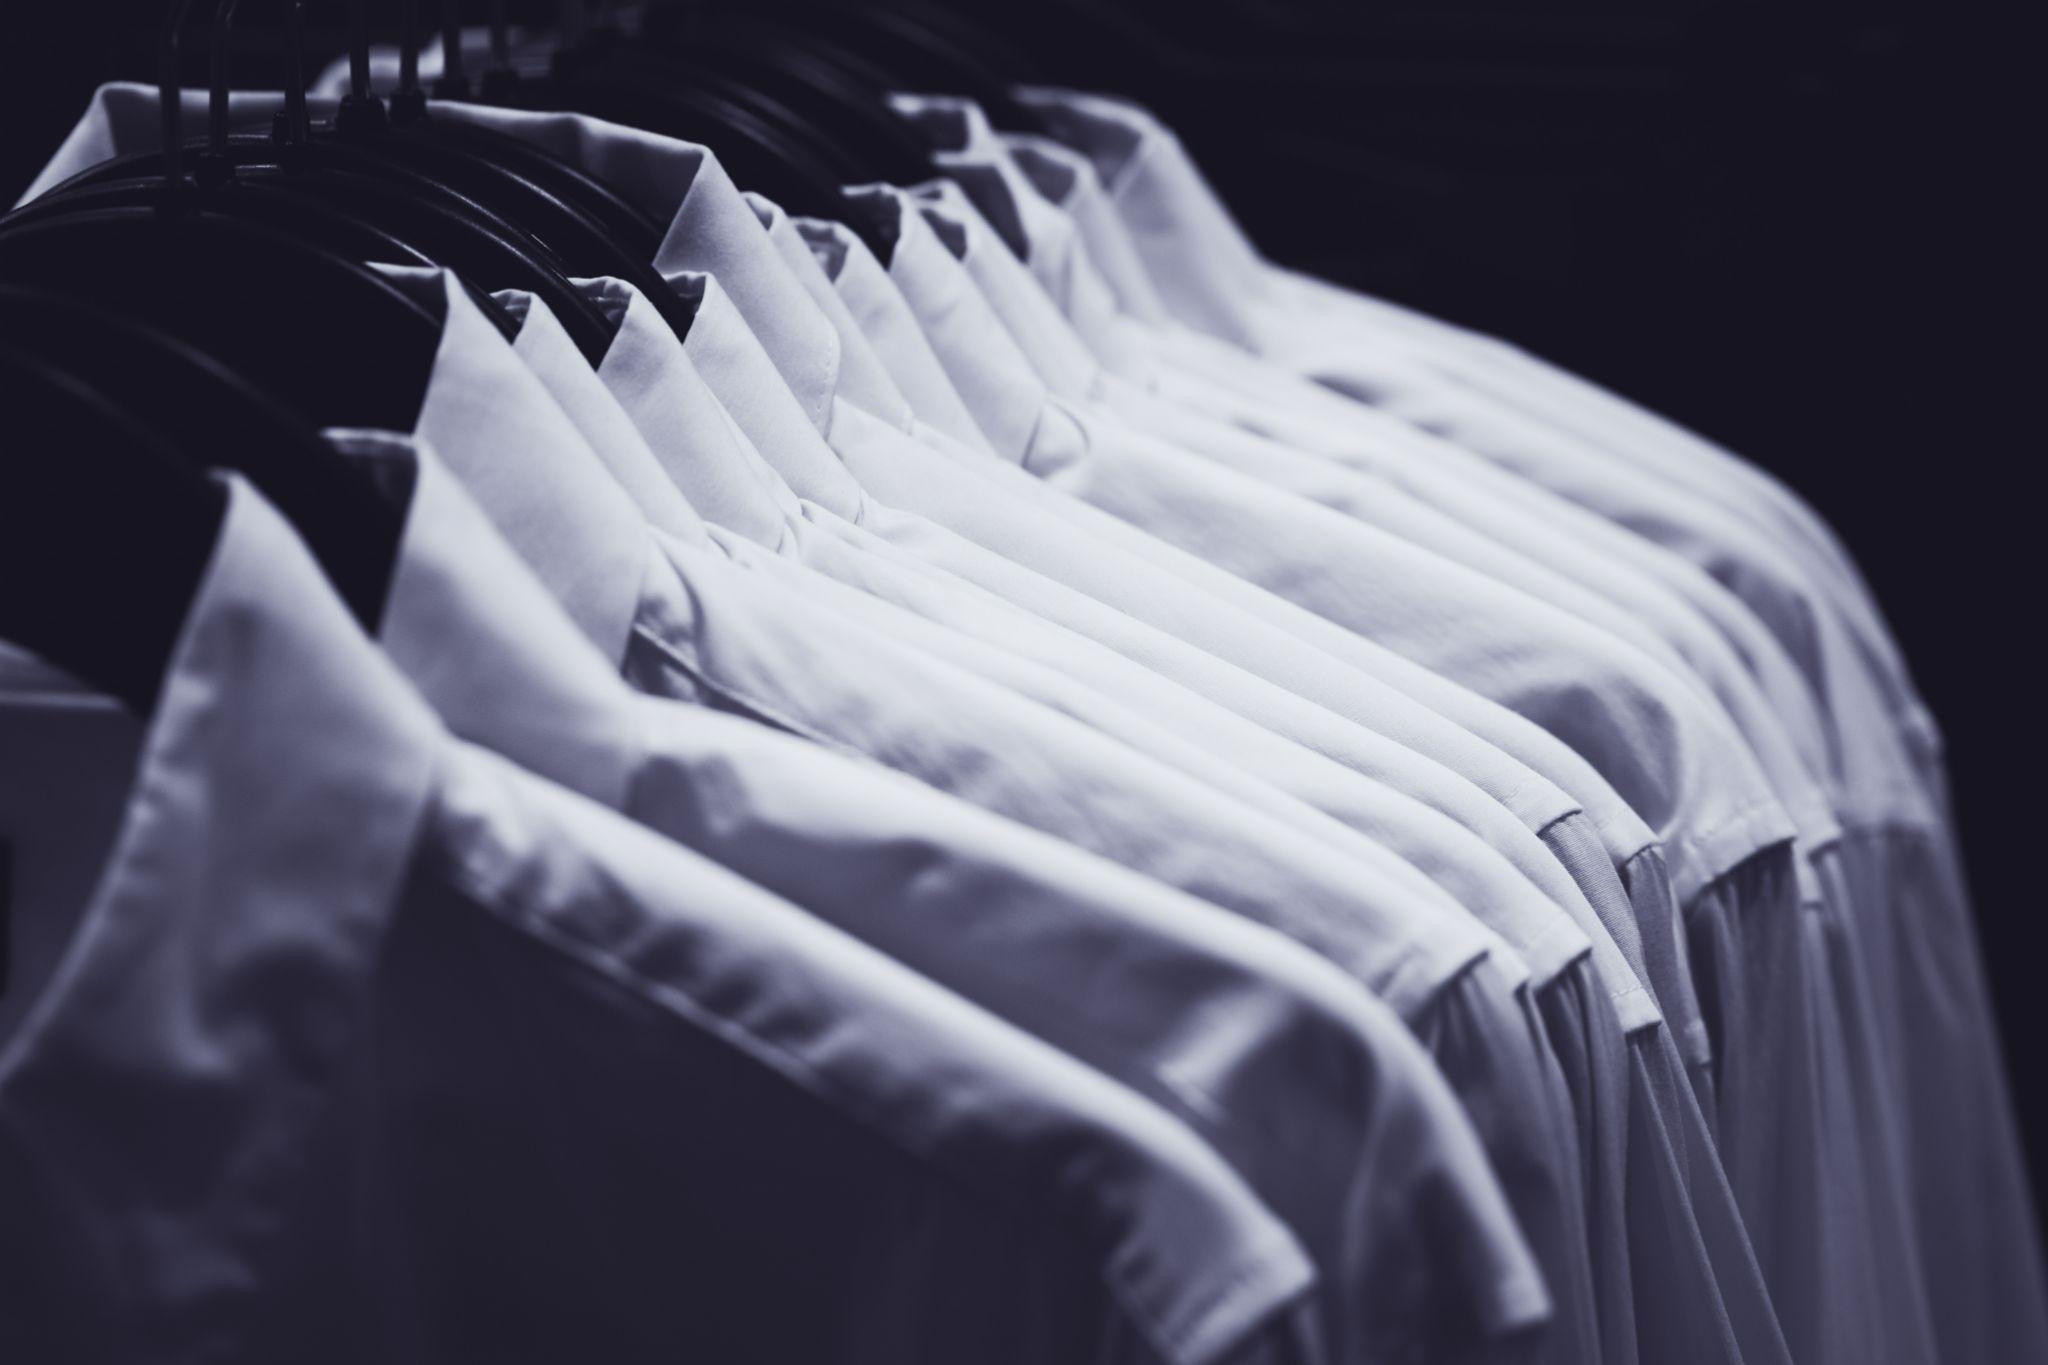 Row of white shirts hang on hangers in the darkness